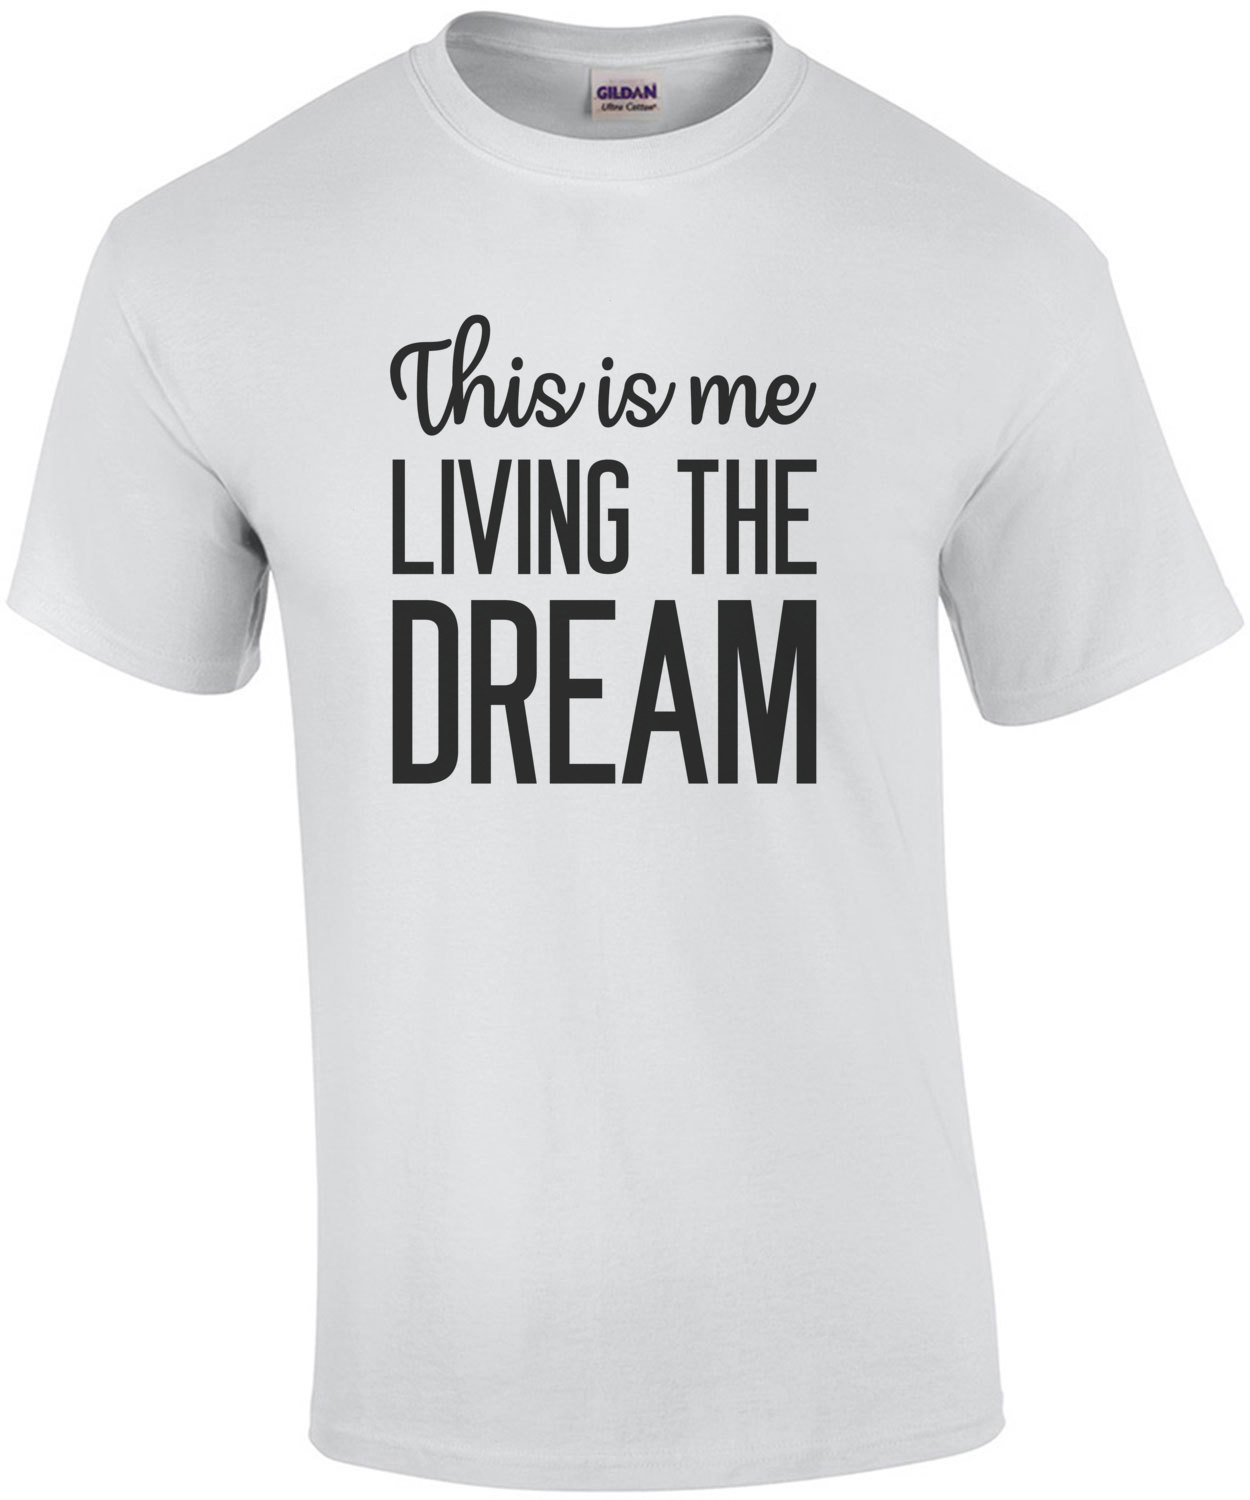 This is me living the dream - funny t-shirt